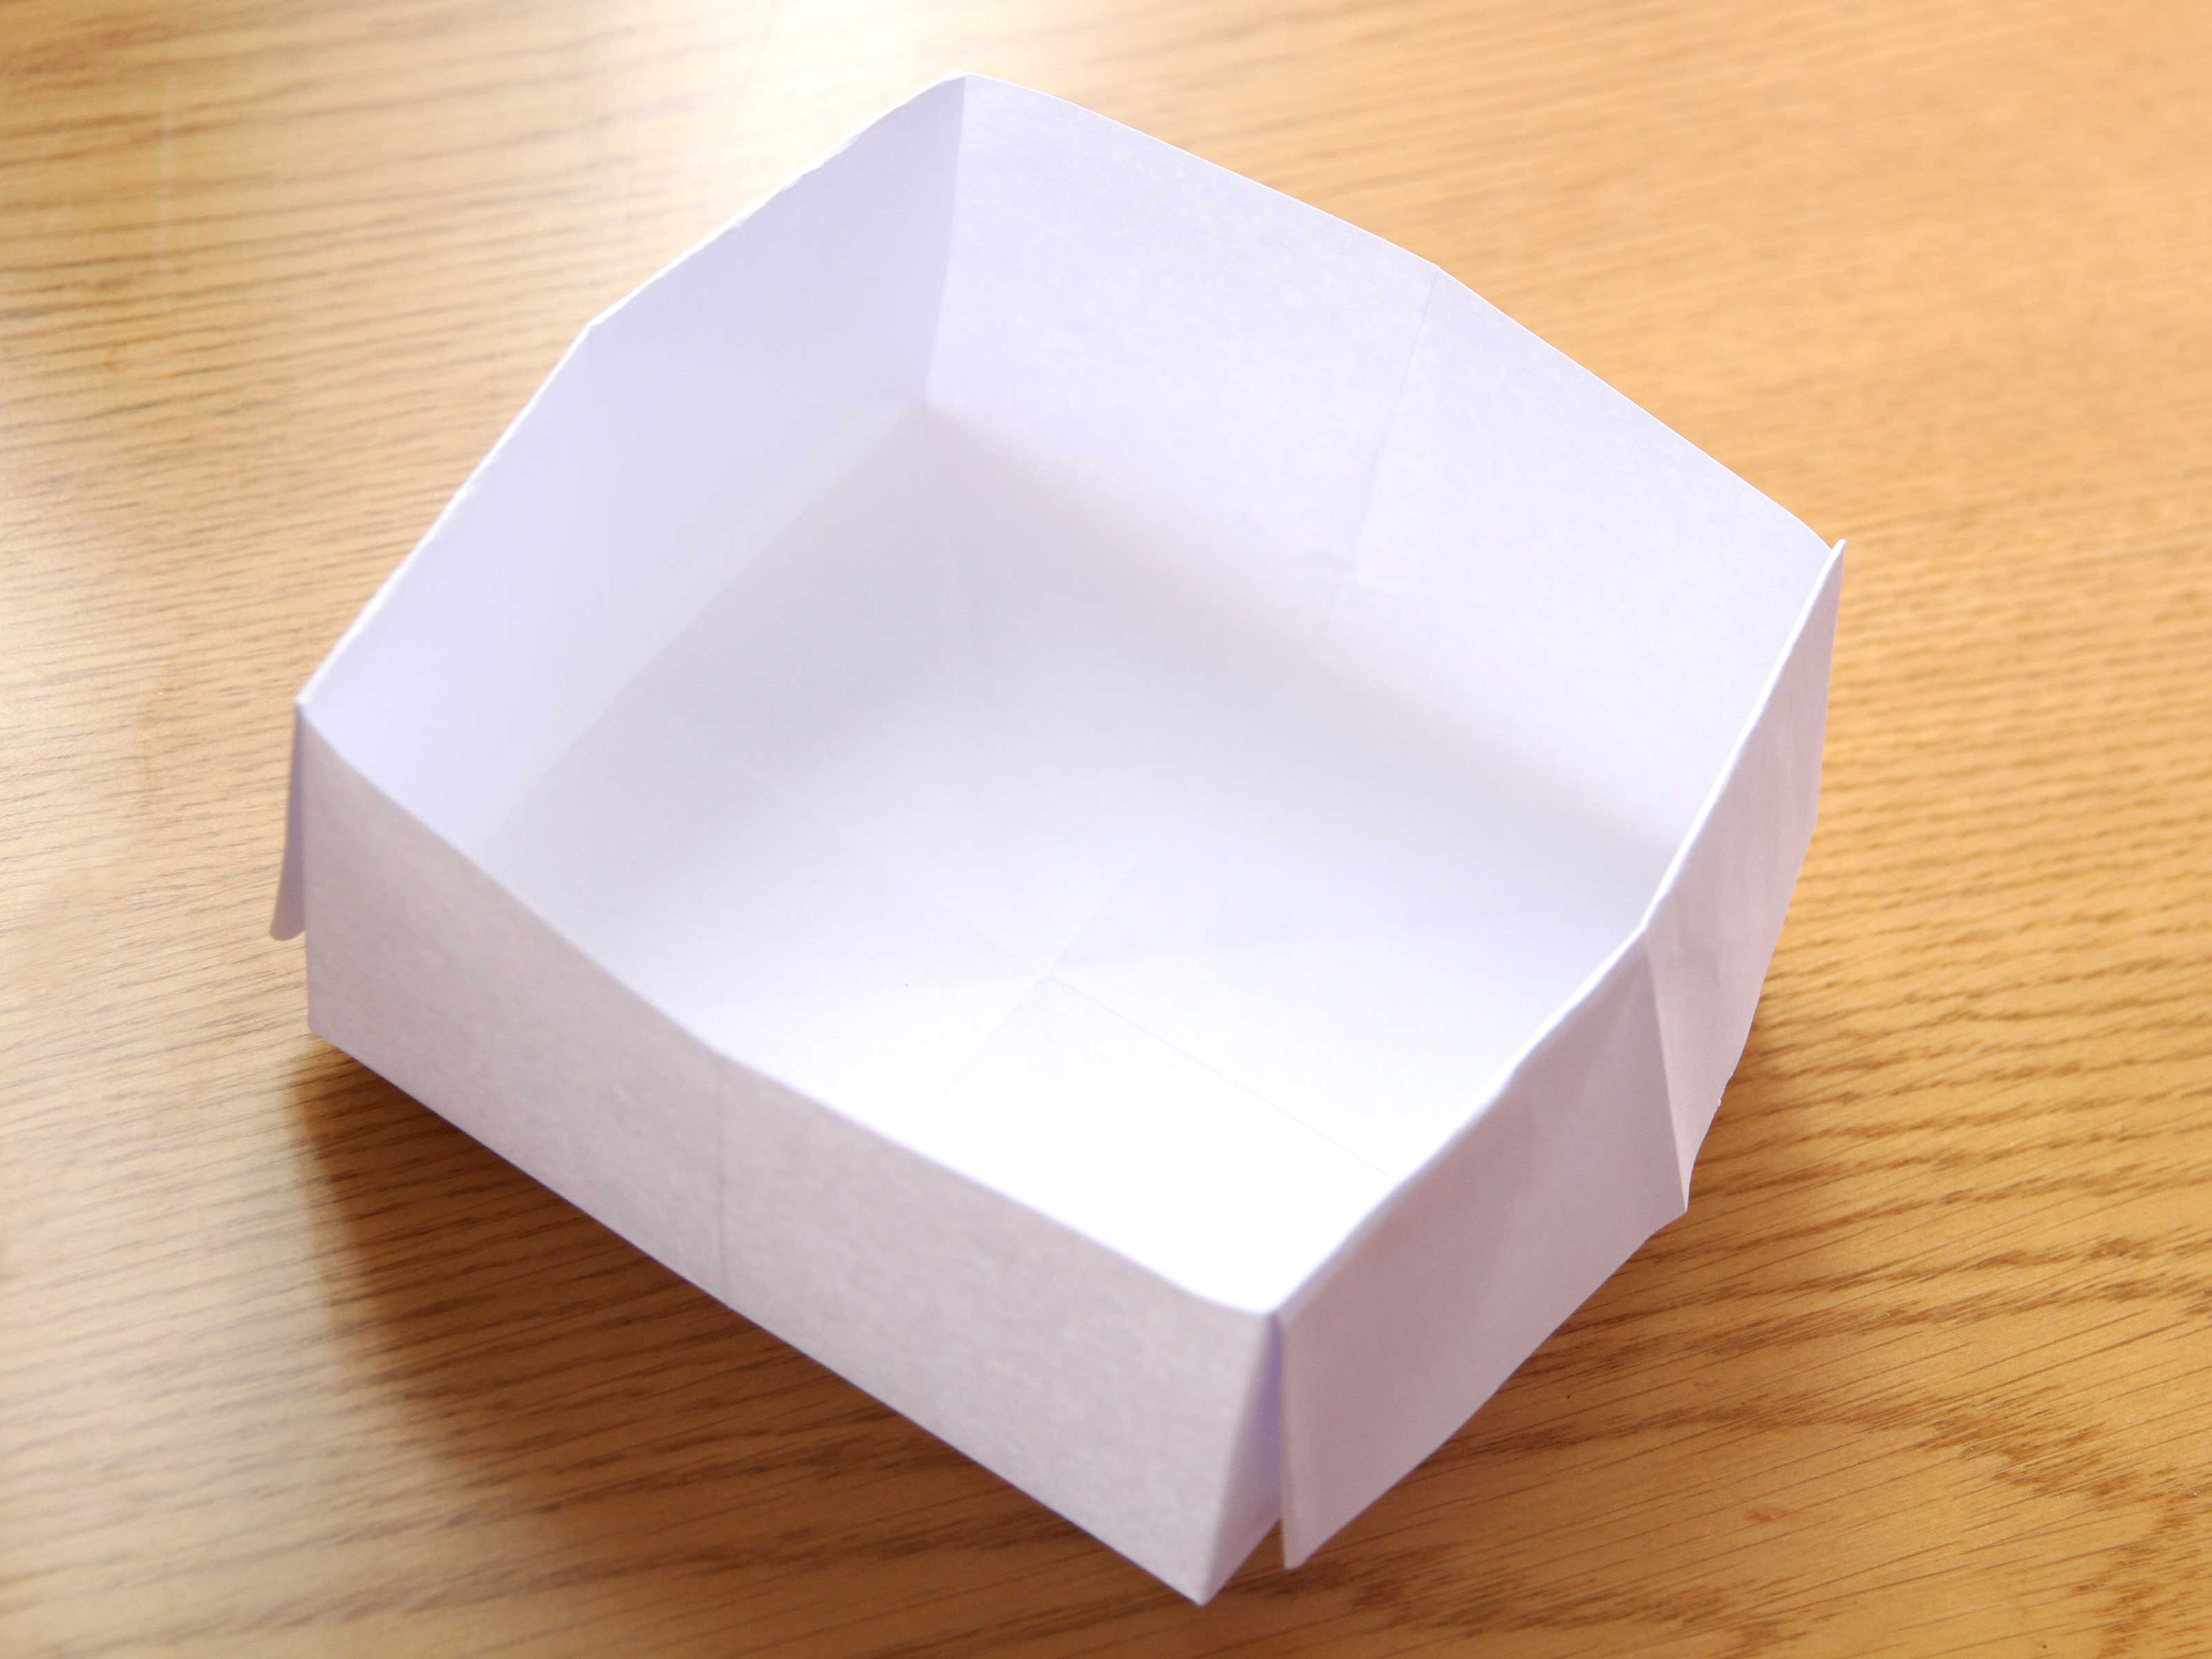 Printer Paper Origami How To Make An Origami Box With Printer Paper 12 Steps